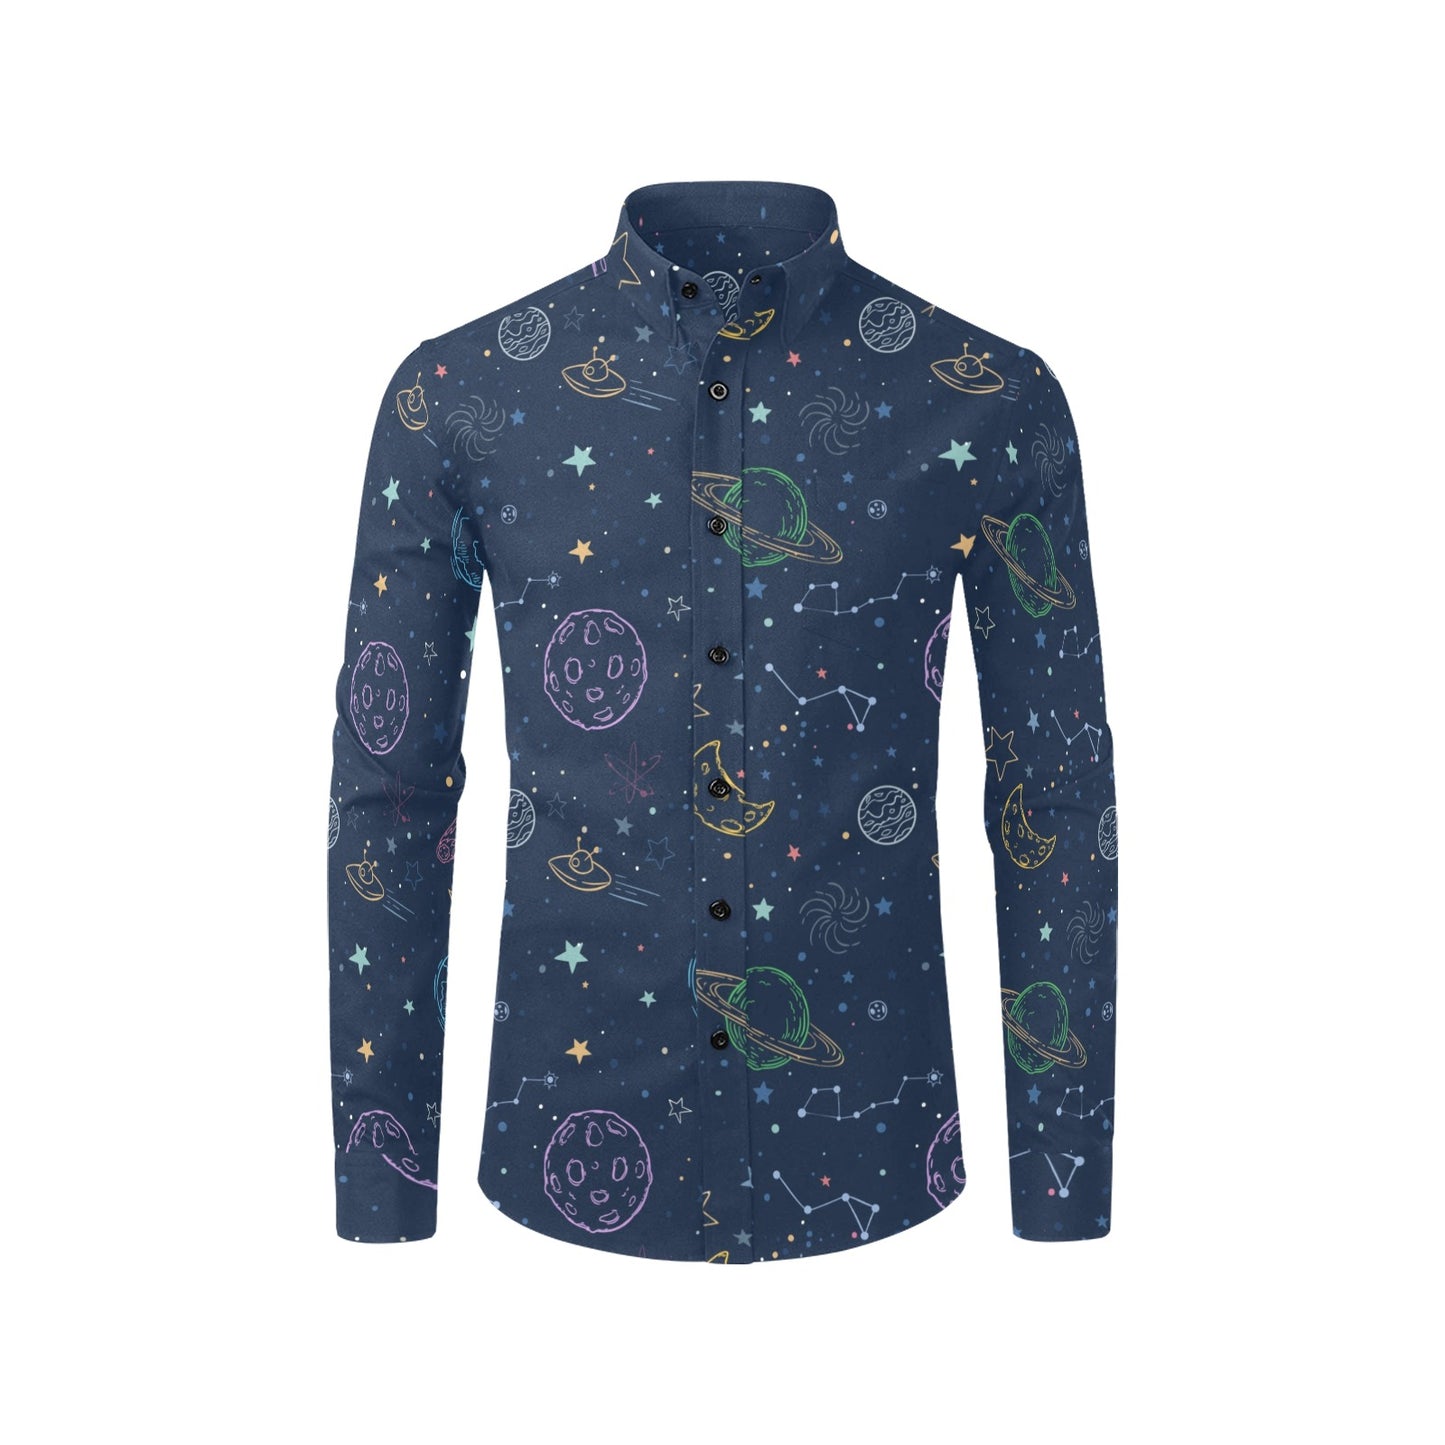 Planets Long Sleeve Men Button Up Shirt, Space Stars Universe Cosmos Print Buttoned Collar Dress Shirt with Chest Pocket